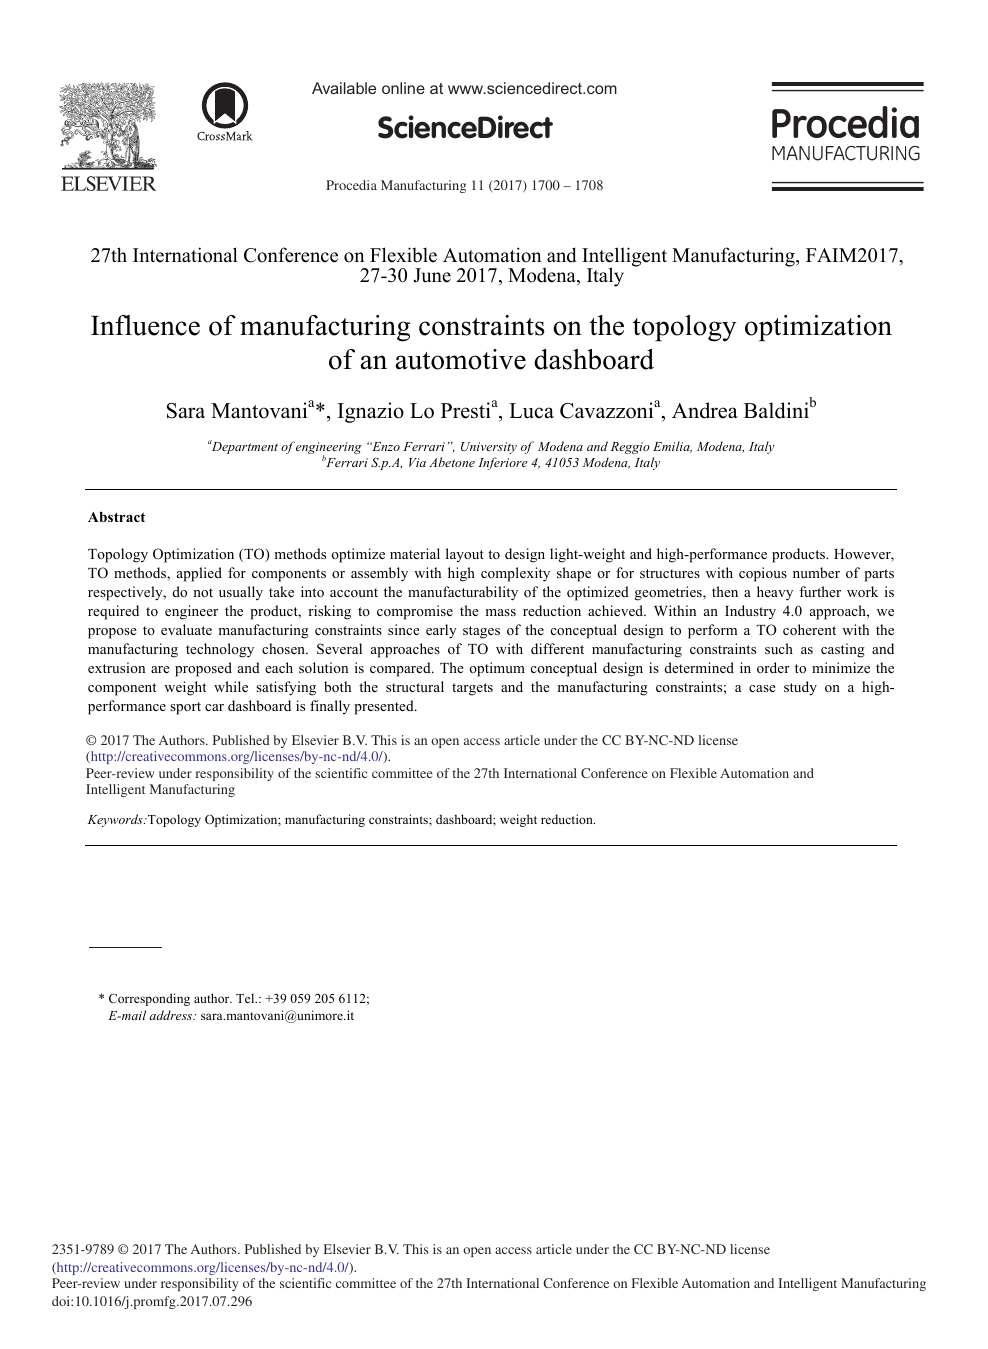 Influence Of Manufacturing Constraints On The Topology Optimization Of An Automotive Dashboard Topic Of Research Paper In Materials Engineering Download Scholarly Article Pdf And Read For Free On Cyberleninka Open Science